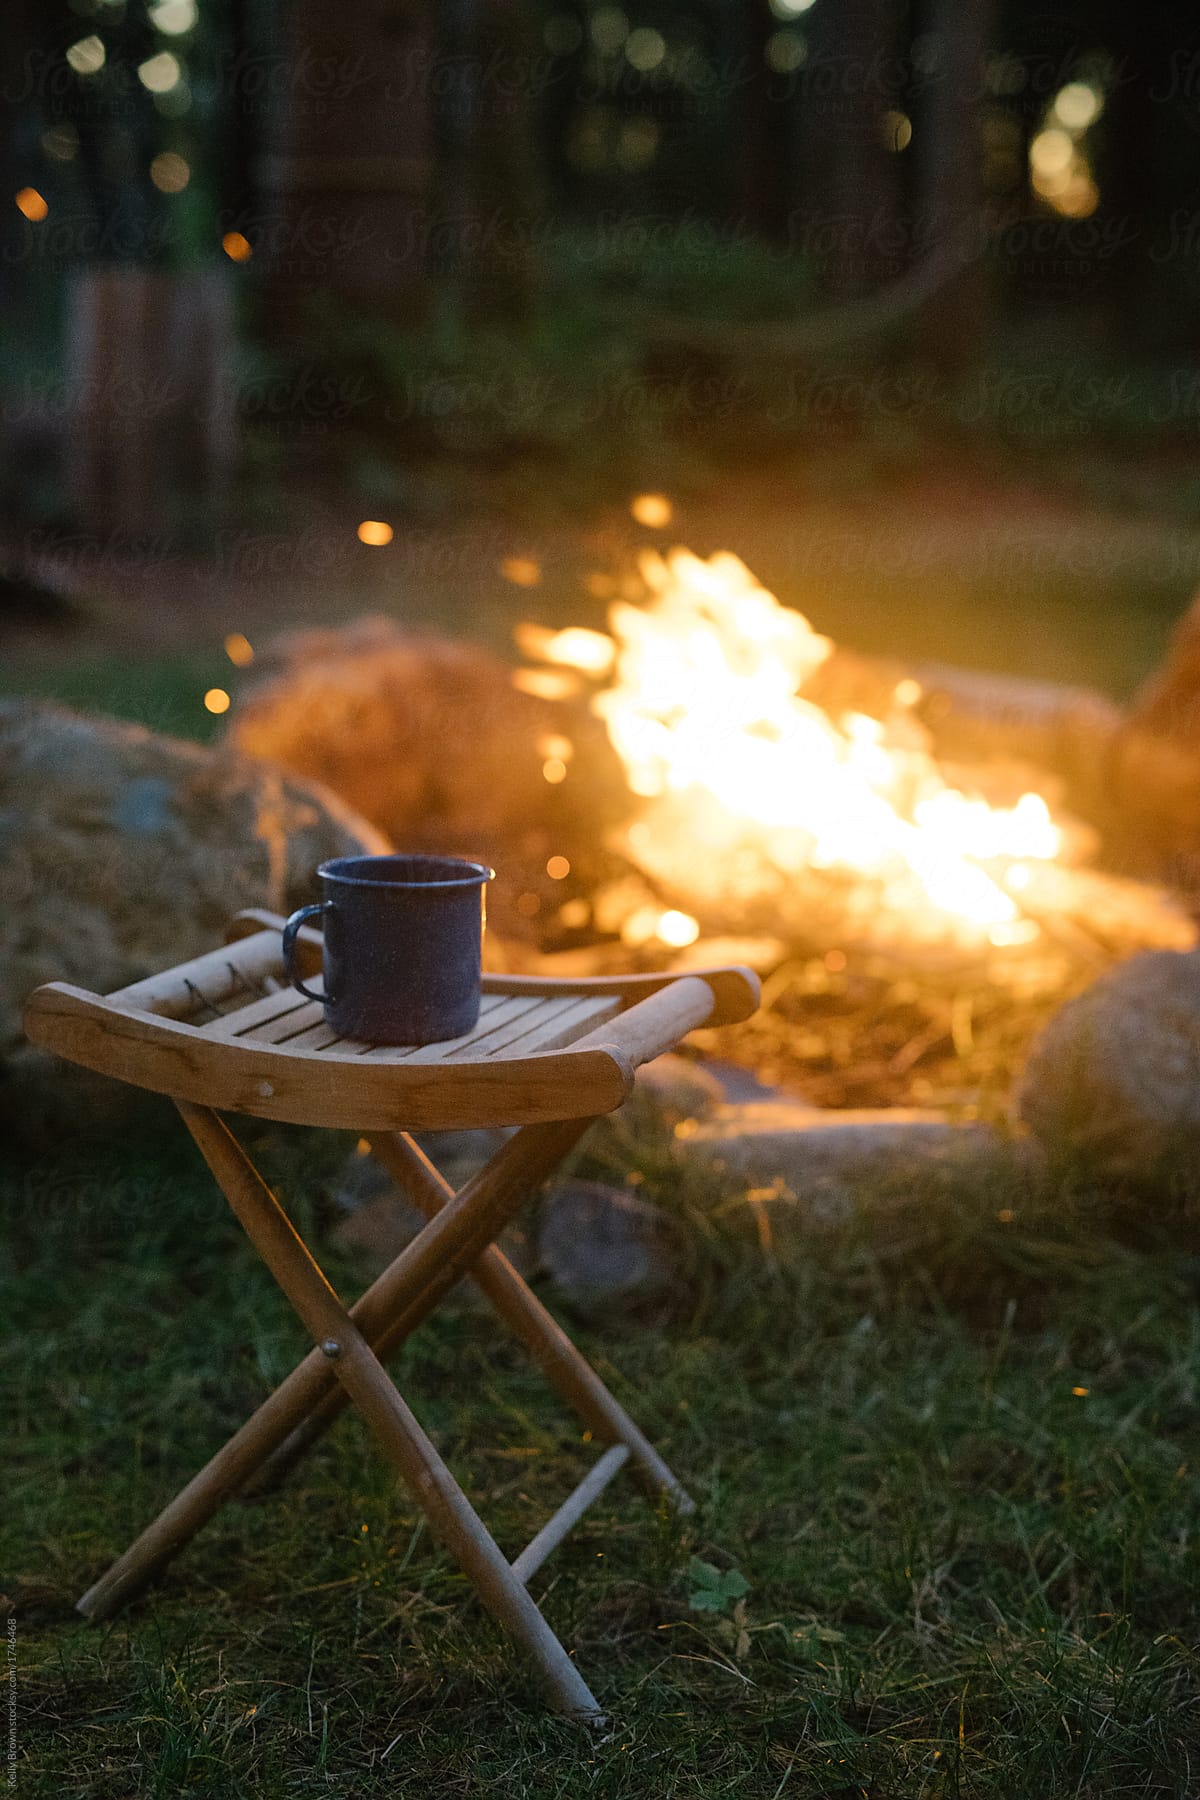 a campfire with an enamel cup on a wooden stool